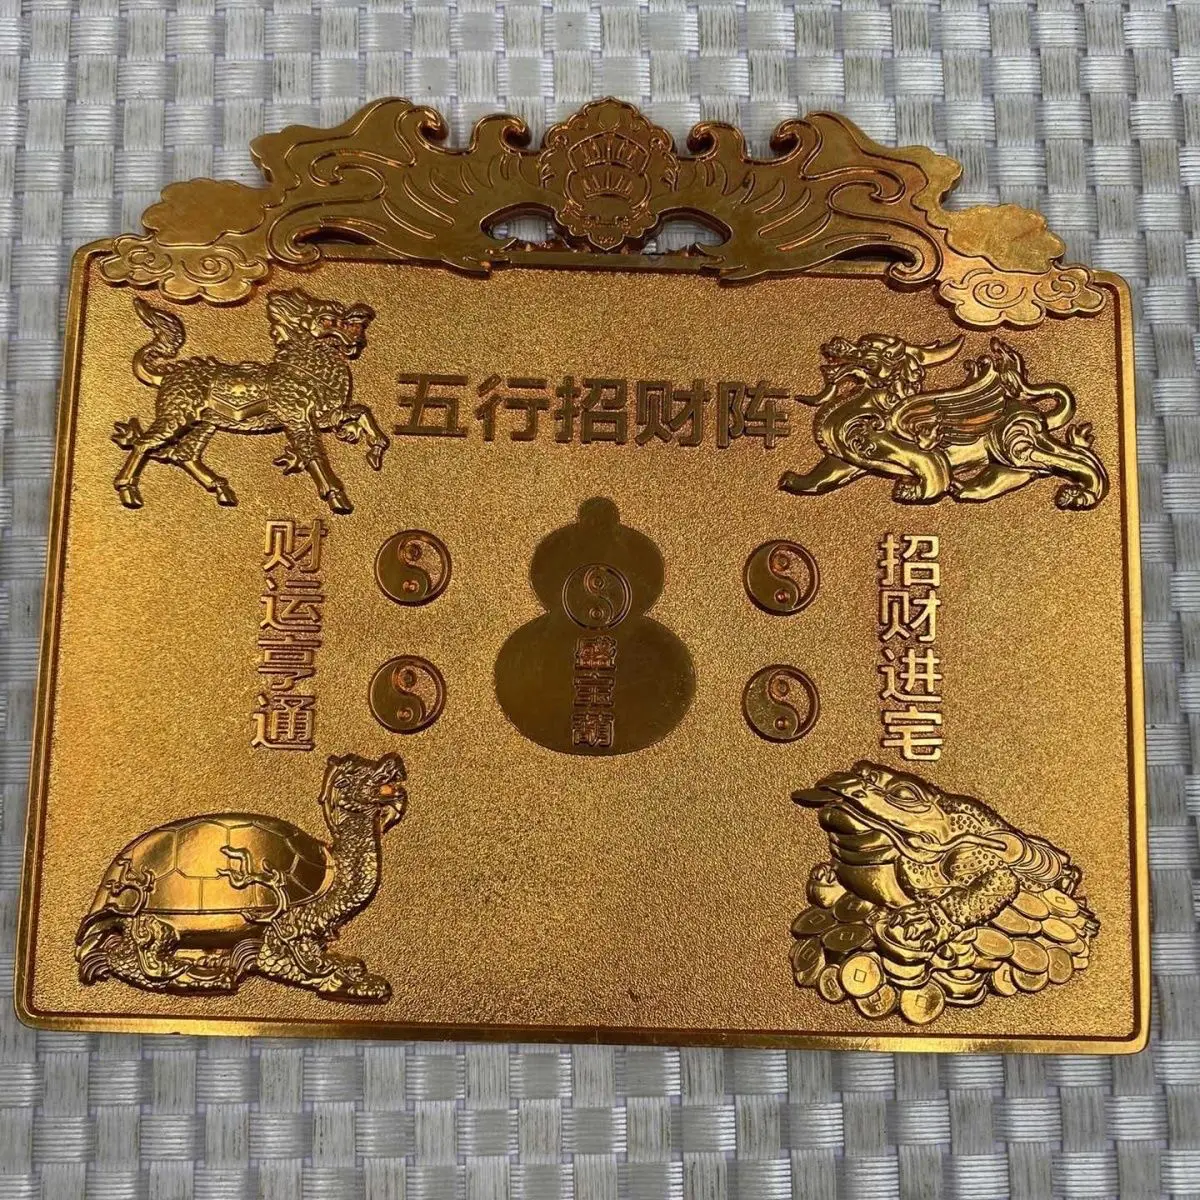 

Zhao Gongming's Wealth Attraction Order, Yellow Bronze Medal Decoration, Business Fifth Road God of Wealth Boss, Desktop Noble P